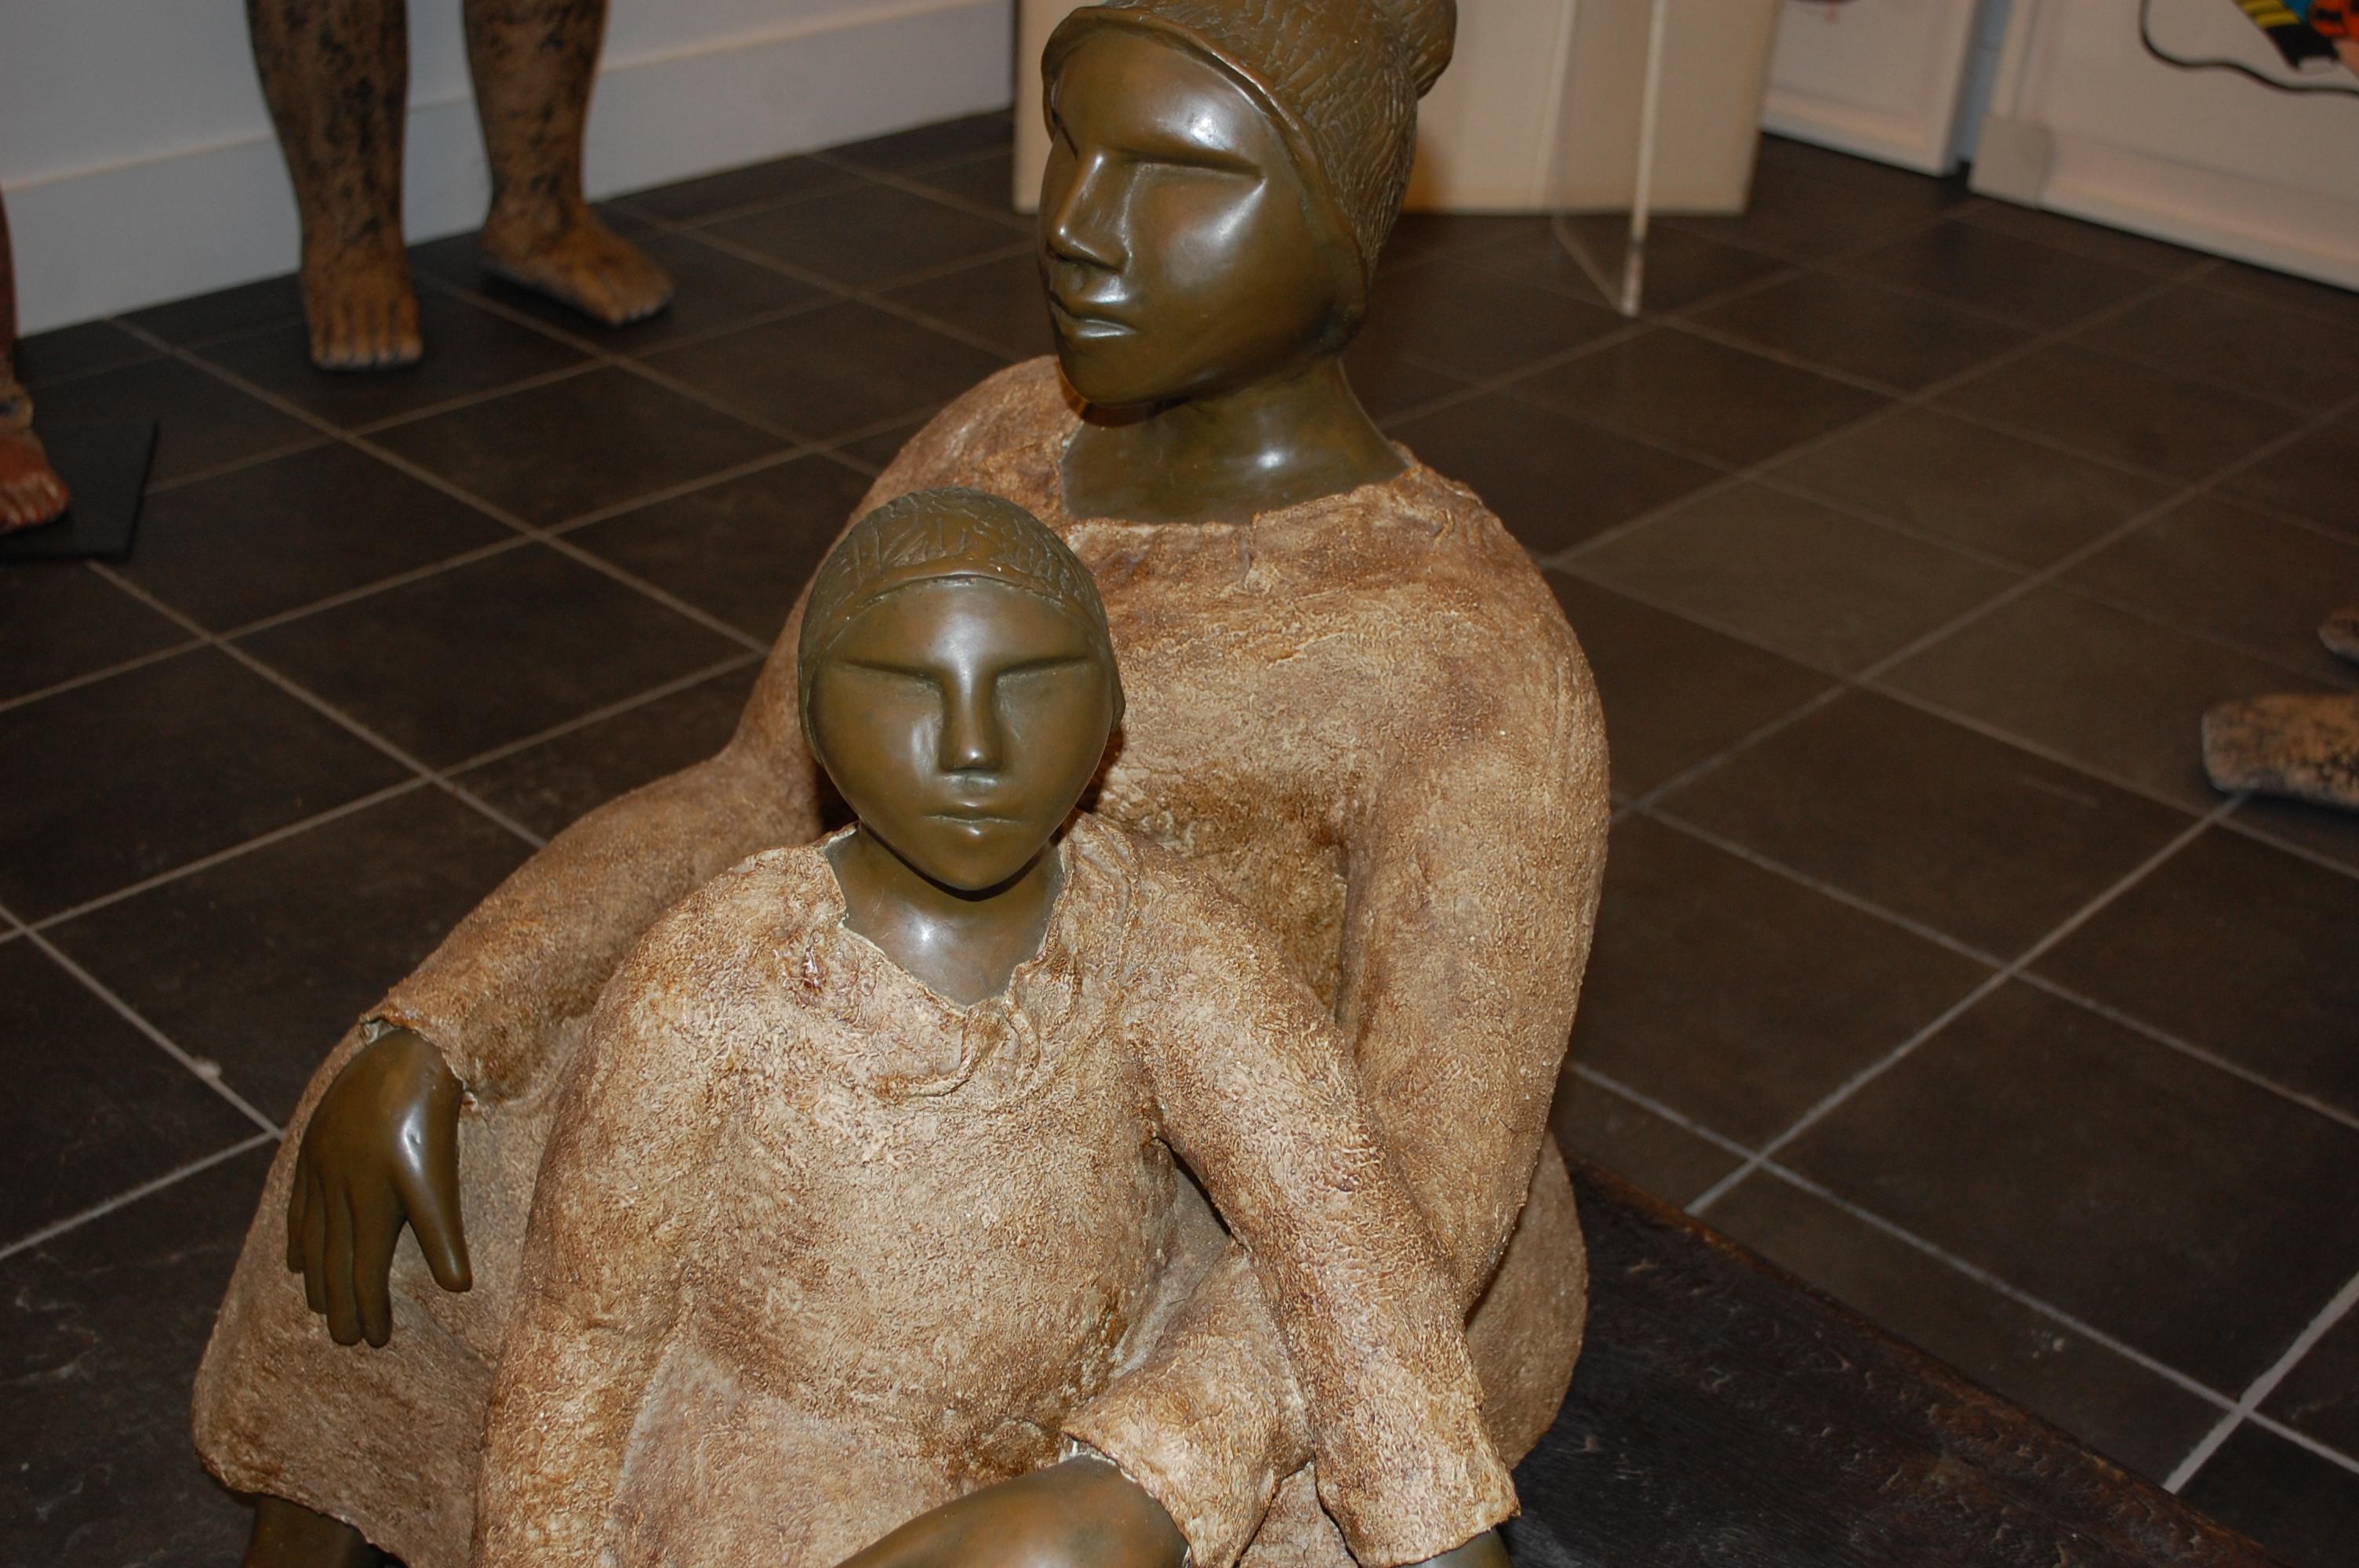 Woman With Child Sitting On The Bench  - Brown Figurative Sculpture by Neptaly Valero 